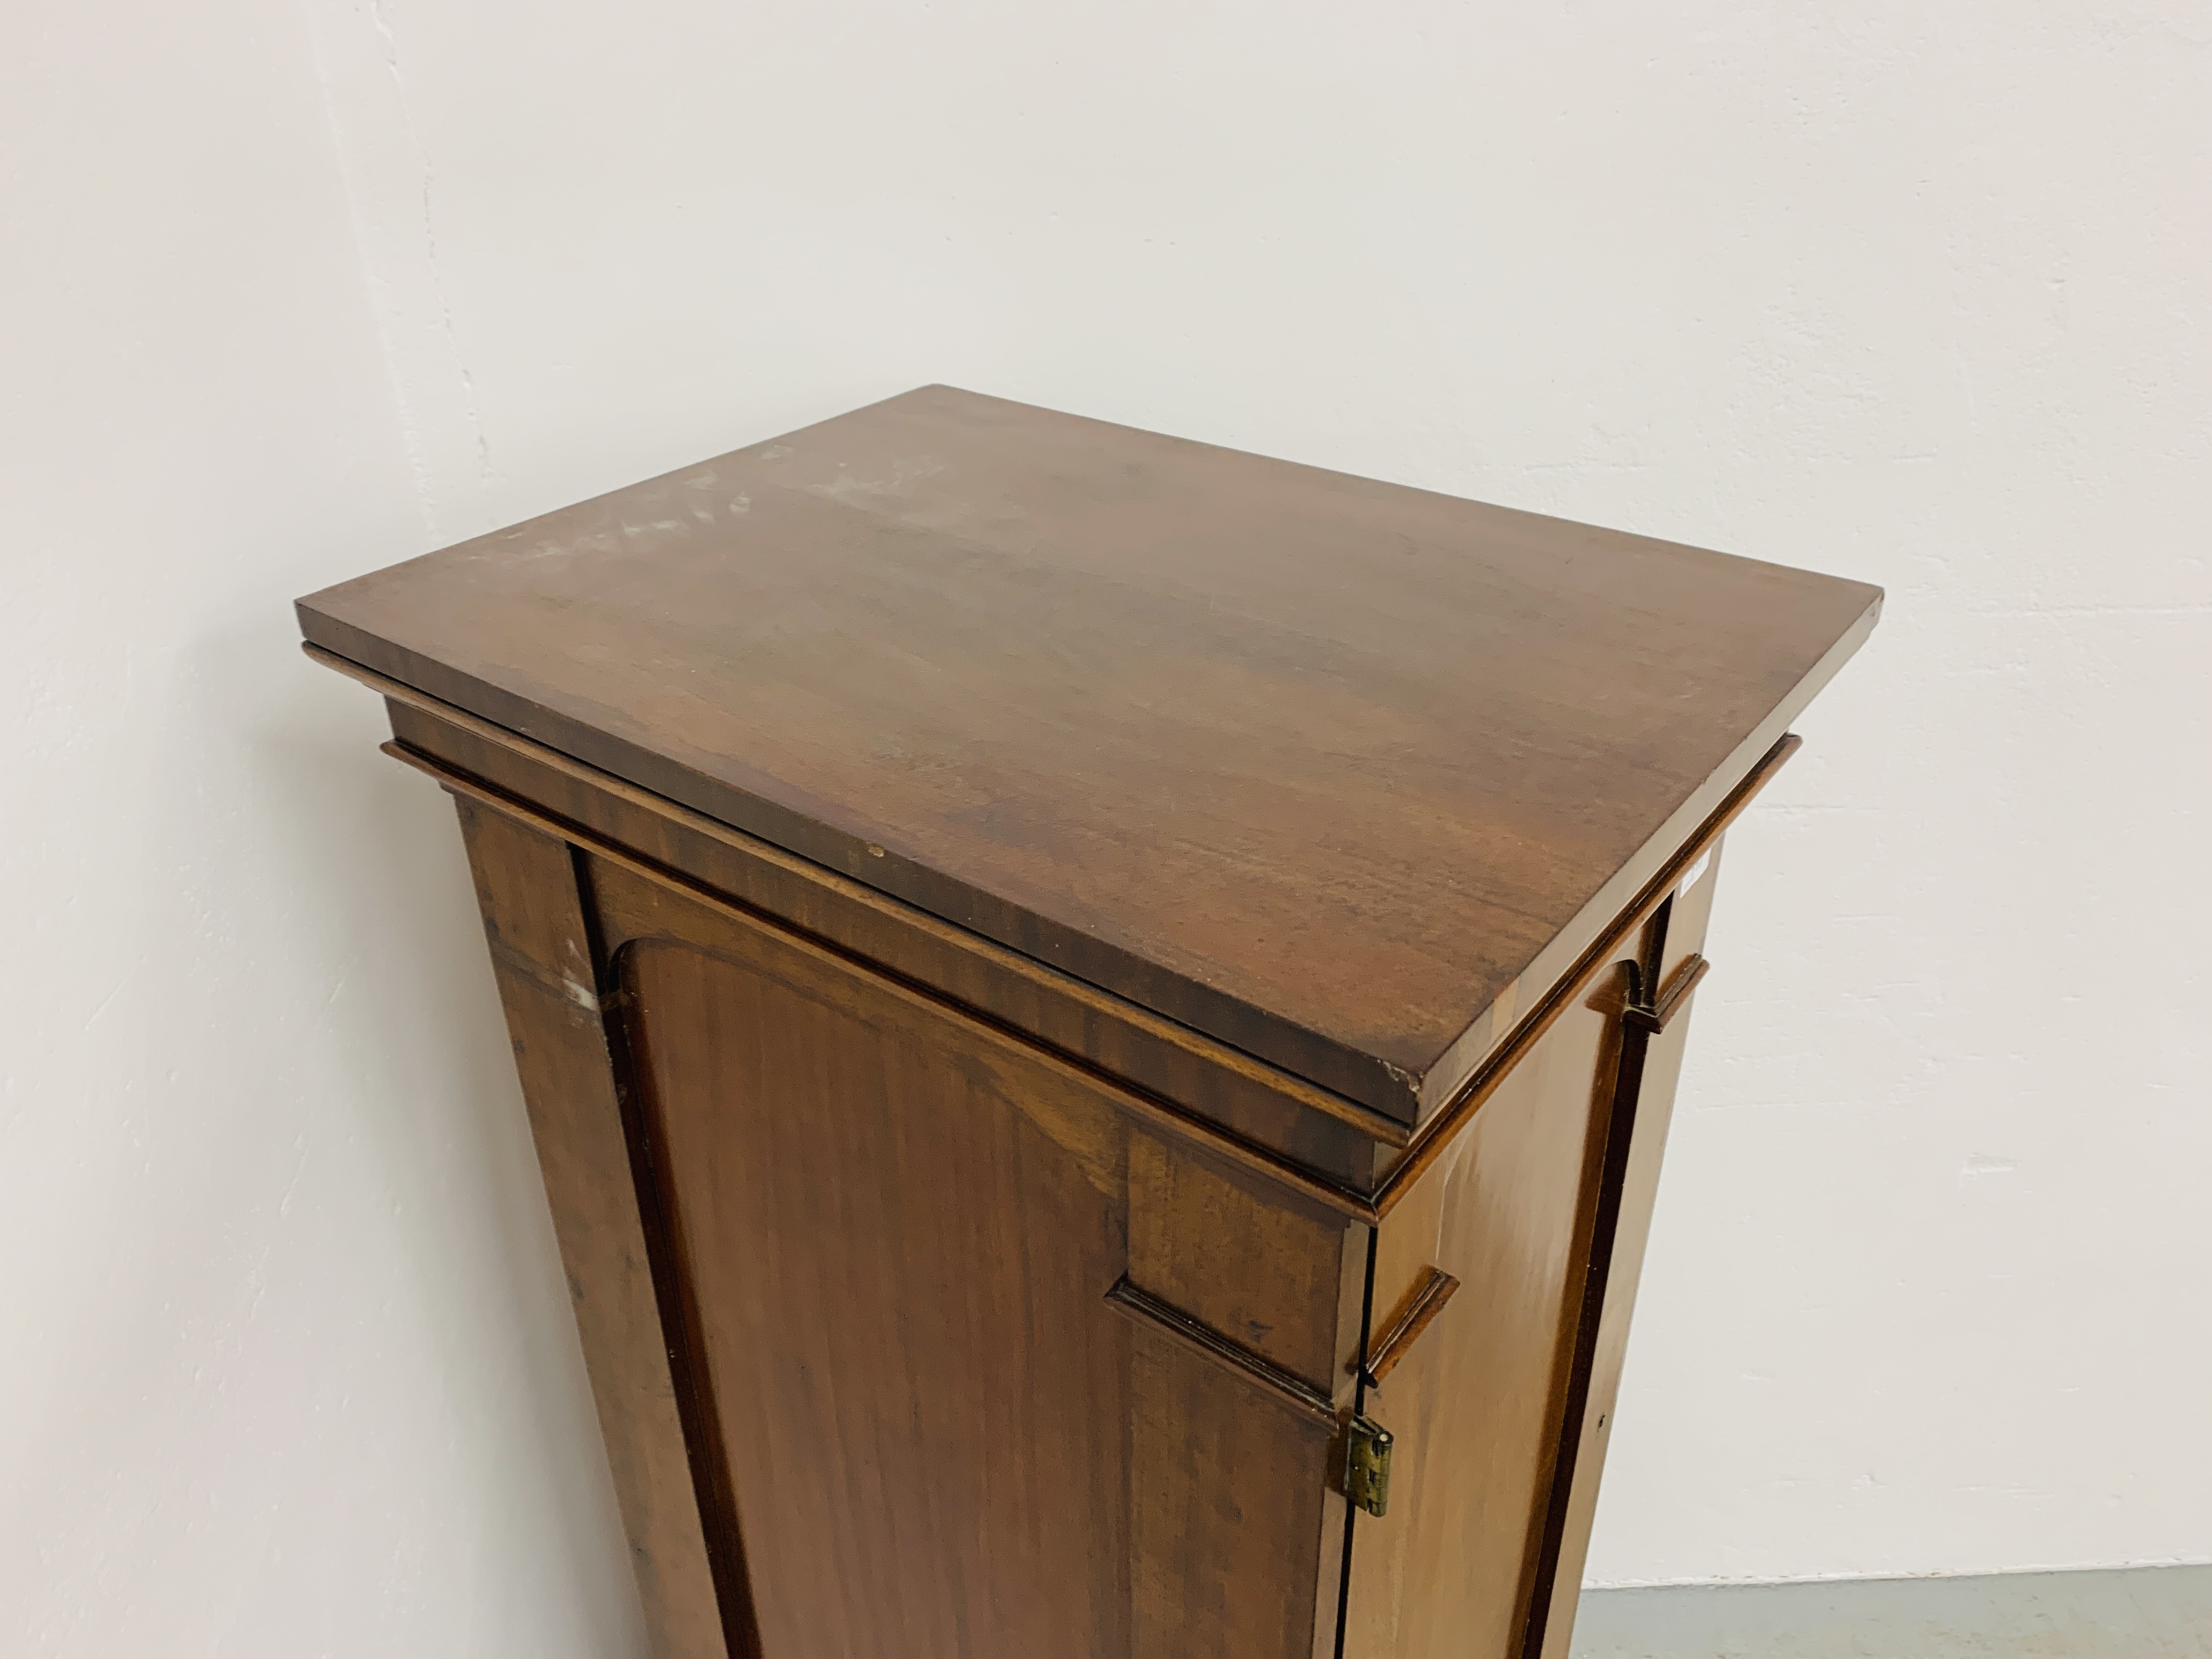 AN EARLY C19TH MAHOGANY SINGLE DOOR PEDESTAL (PART OF A LARGER PIECE) ENCLOSING SEVEN DRAWERS - Image 6 of 17